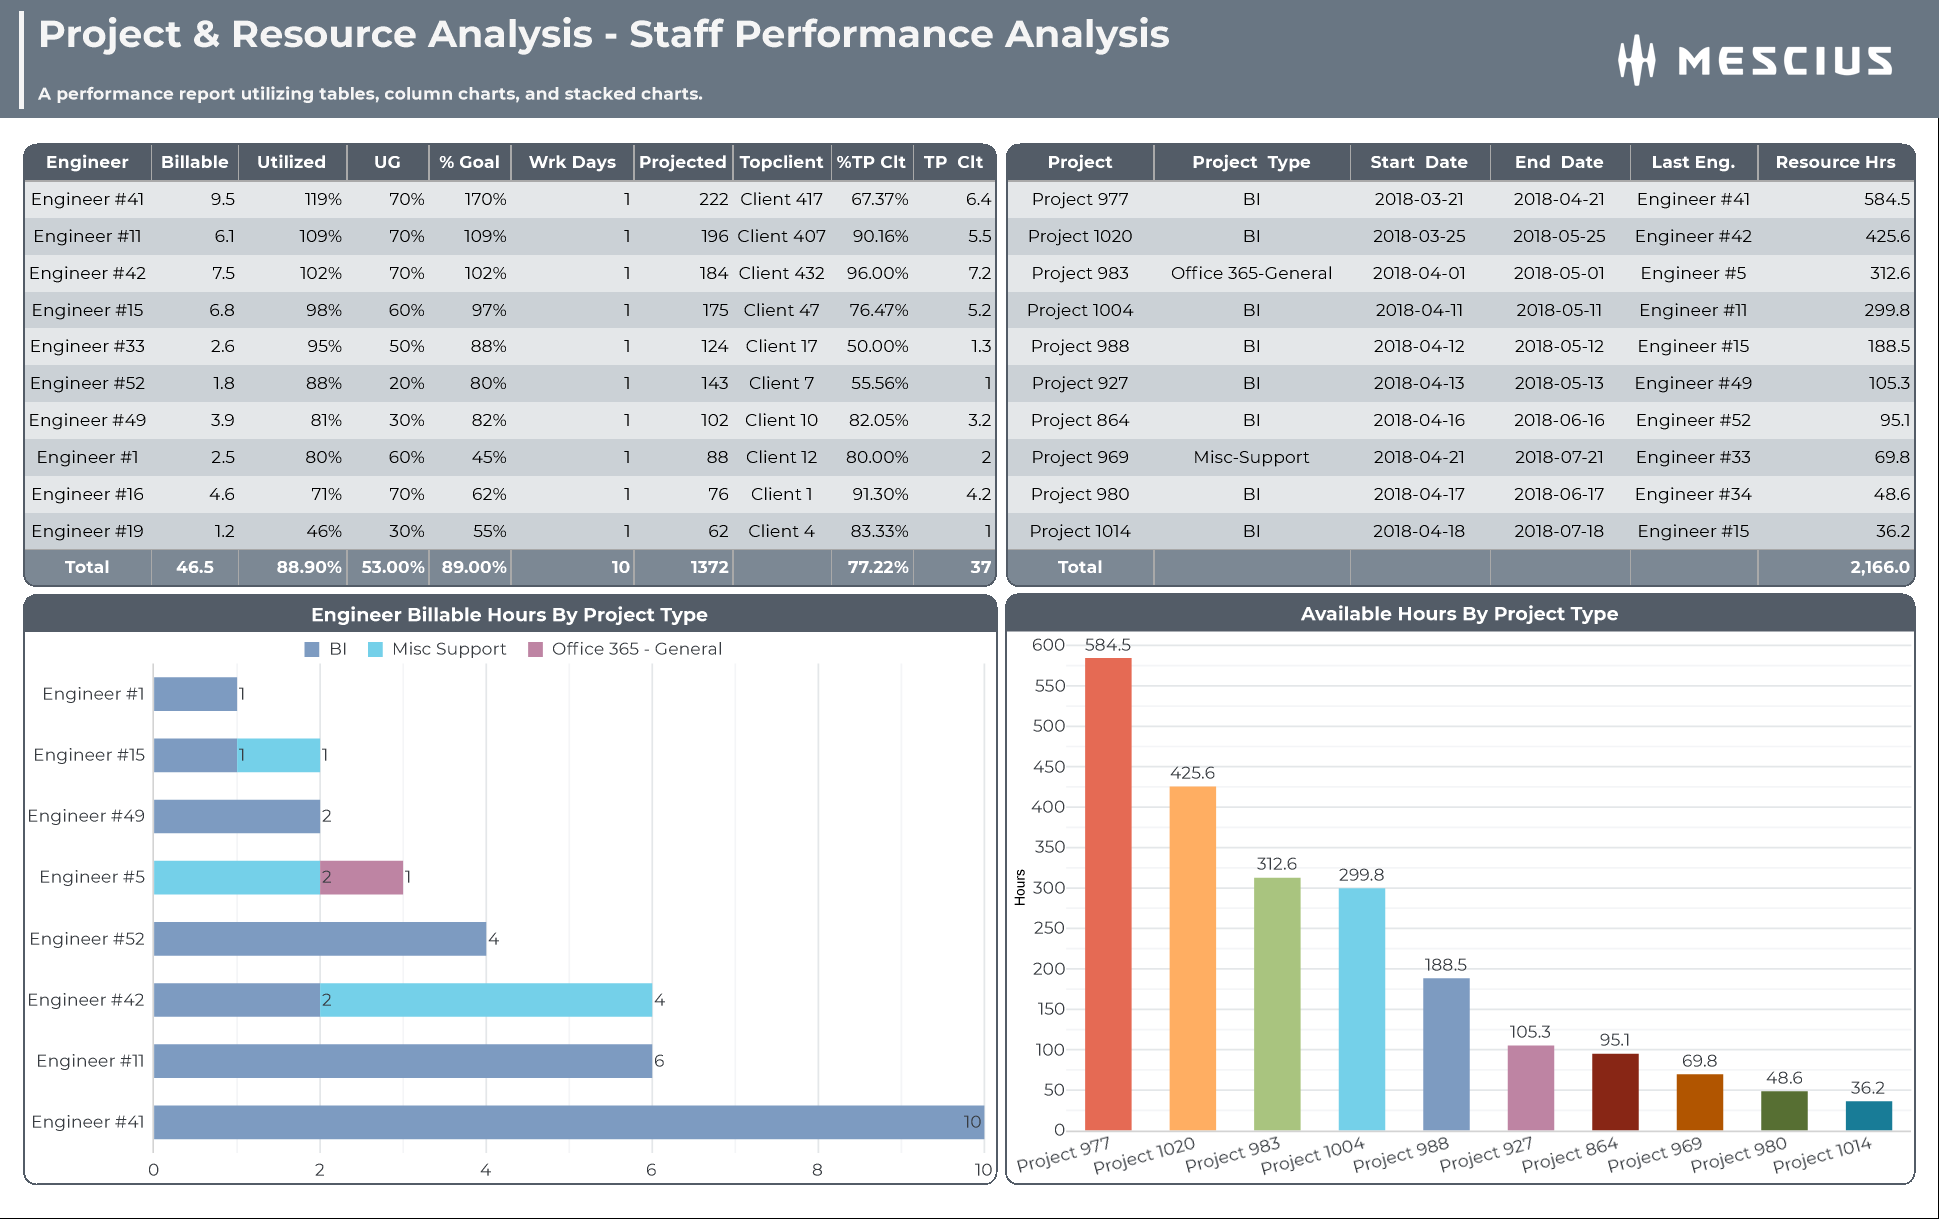 Staff Performance Report: Easily build reports through Drag-and-Drop functionality with various data visualization options that require no manual data entry.